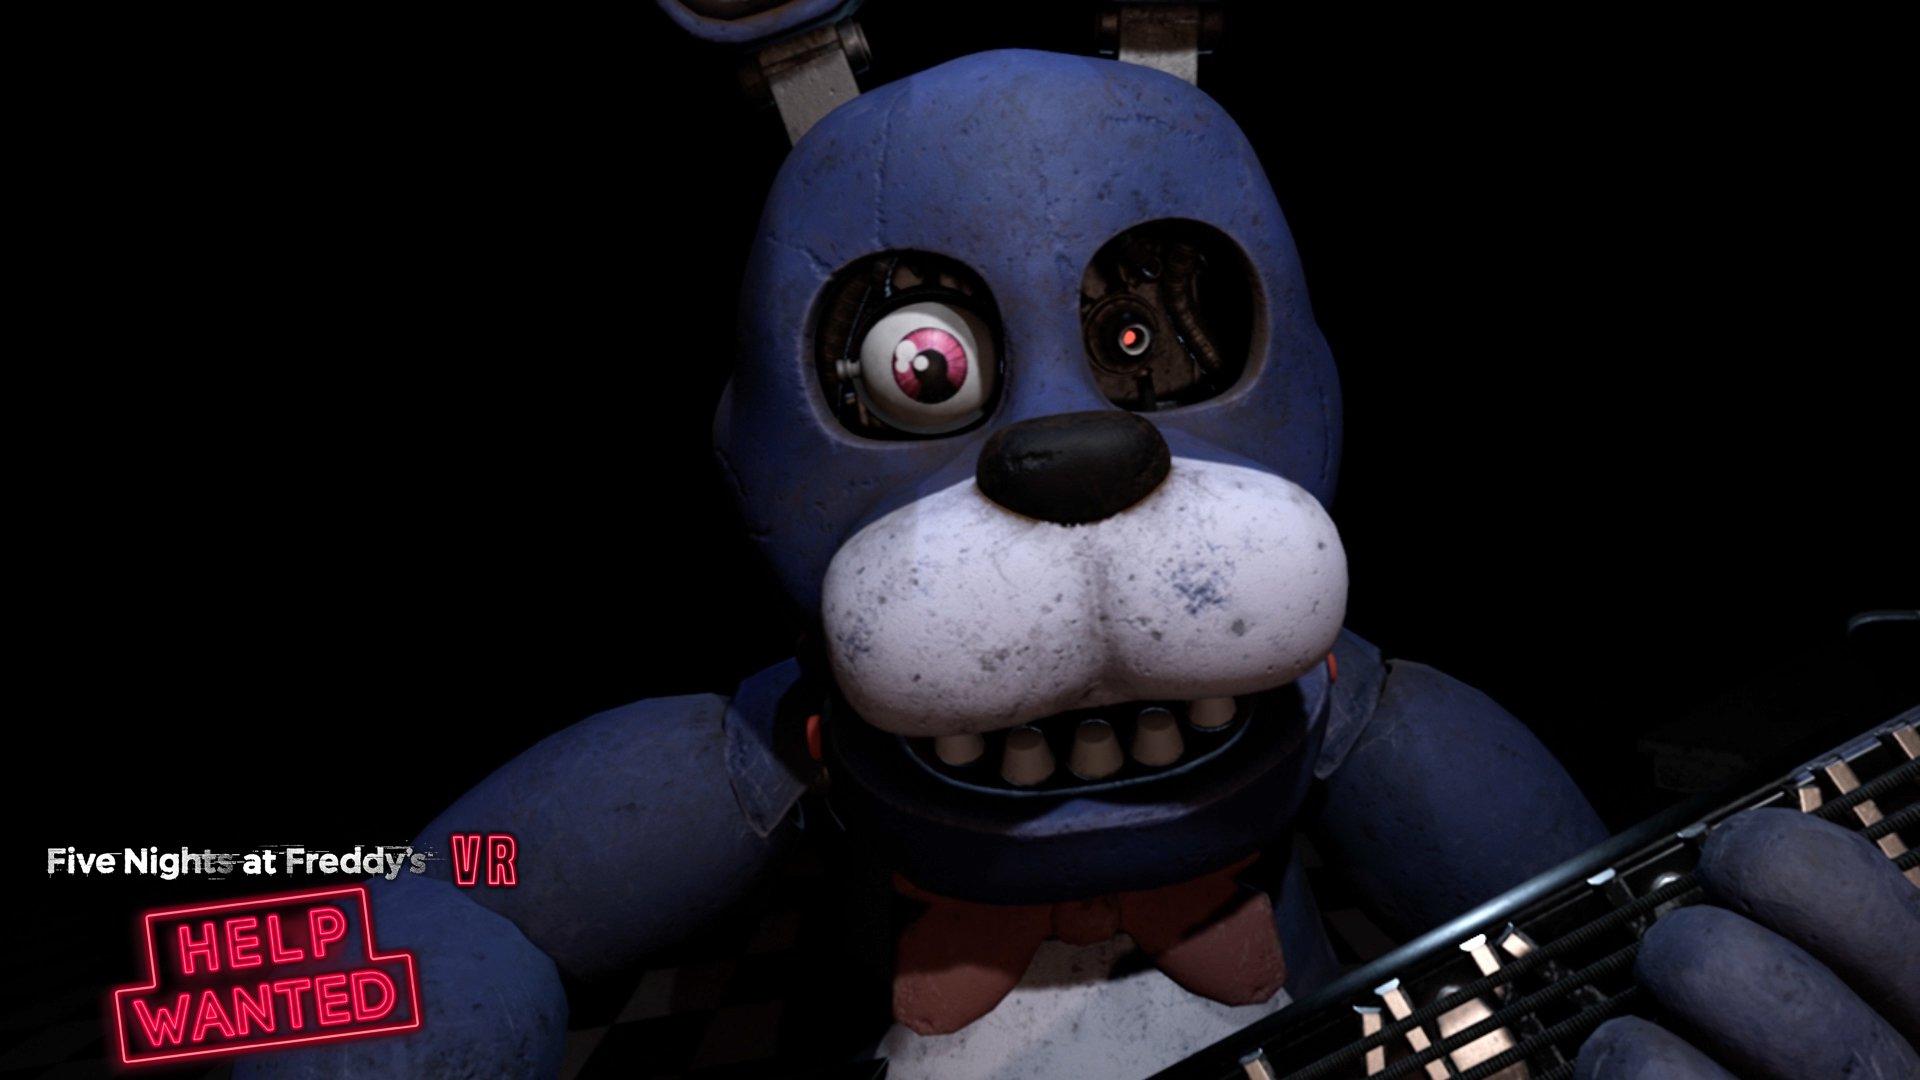 Head and Hands on with Five Nights at Freddys VR: Help Wanted